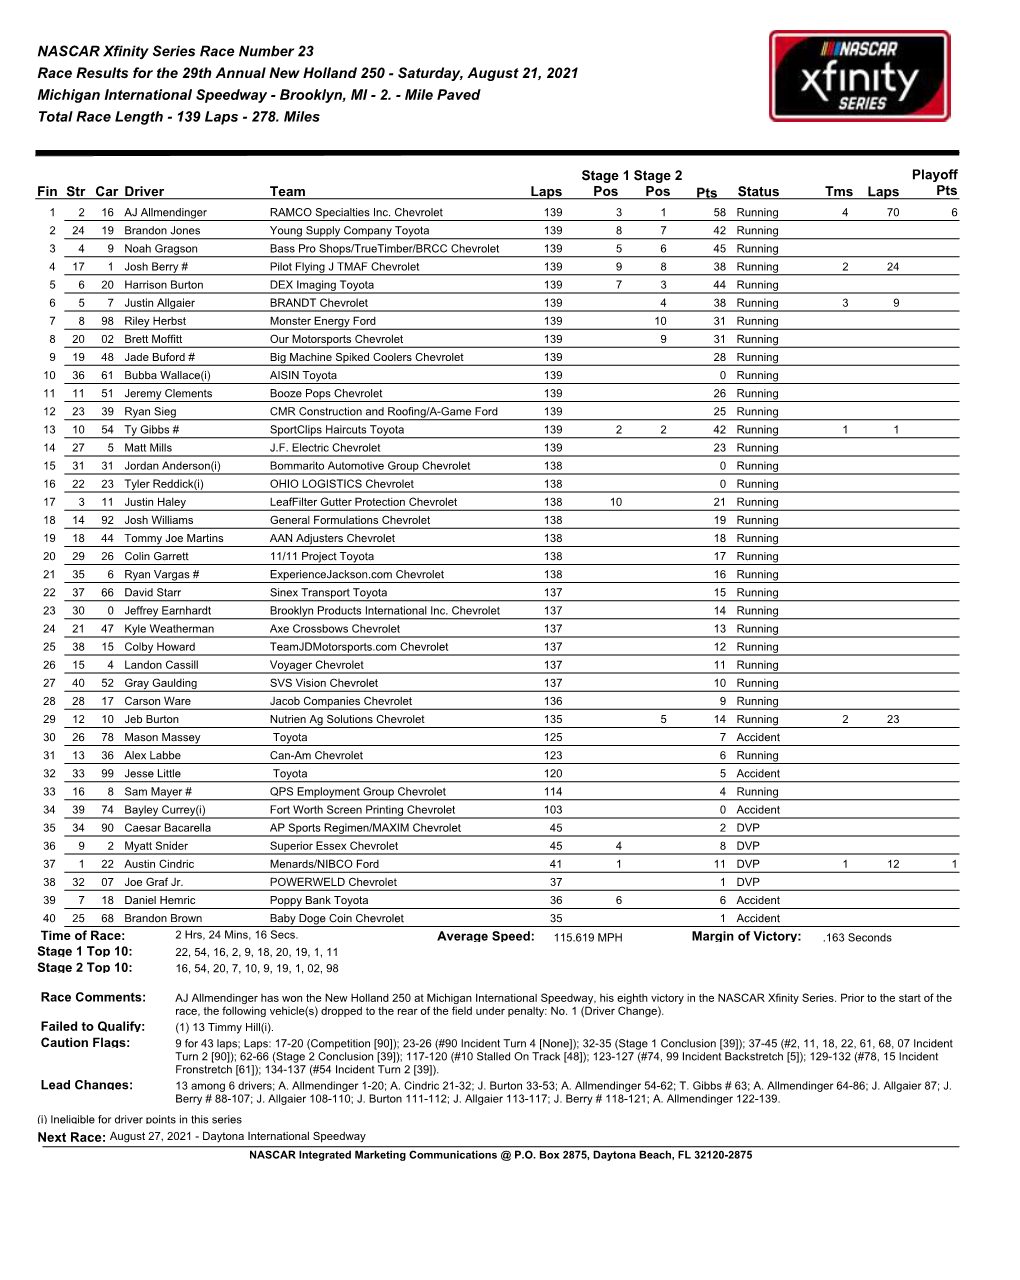 NASCAR Xfinity Series Race Number 23 Race Results for the 29Th Annual New Holland 250 - Saturday, August 21, 2021 Michigan International Speedway - Brooklyn, MI - 2